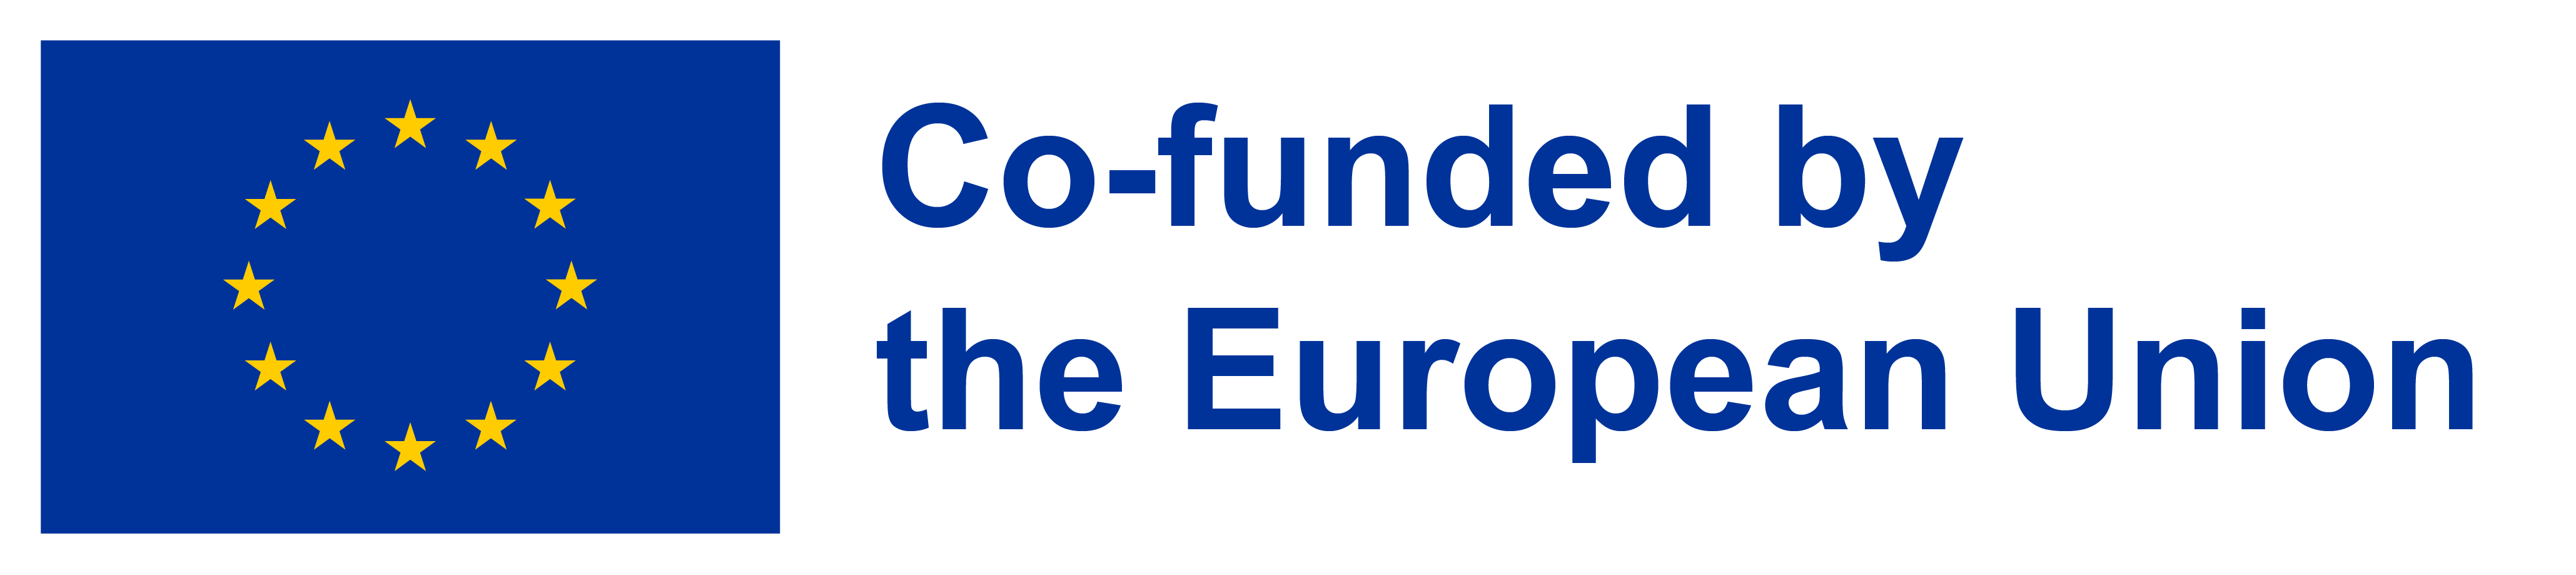 Co-founded by the European Union logo